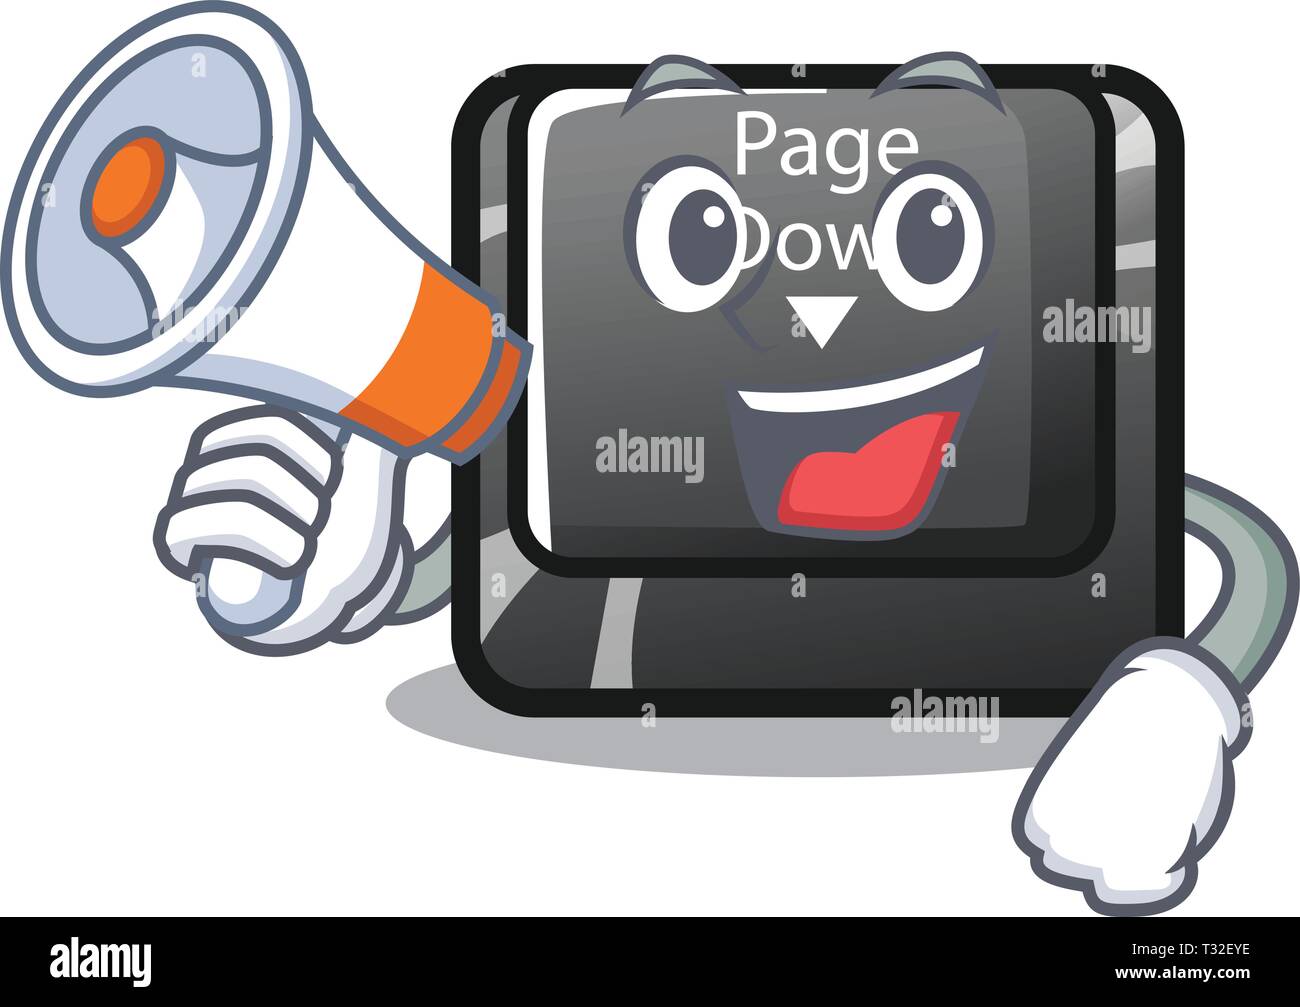 With megaphone character page down button installed computer Stock Vector